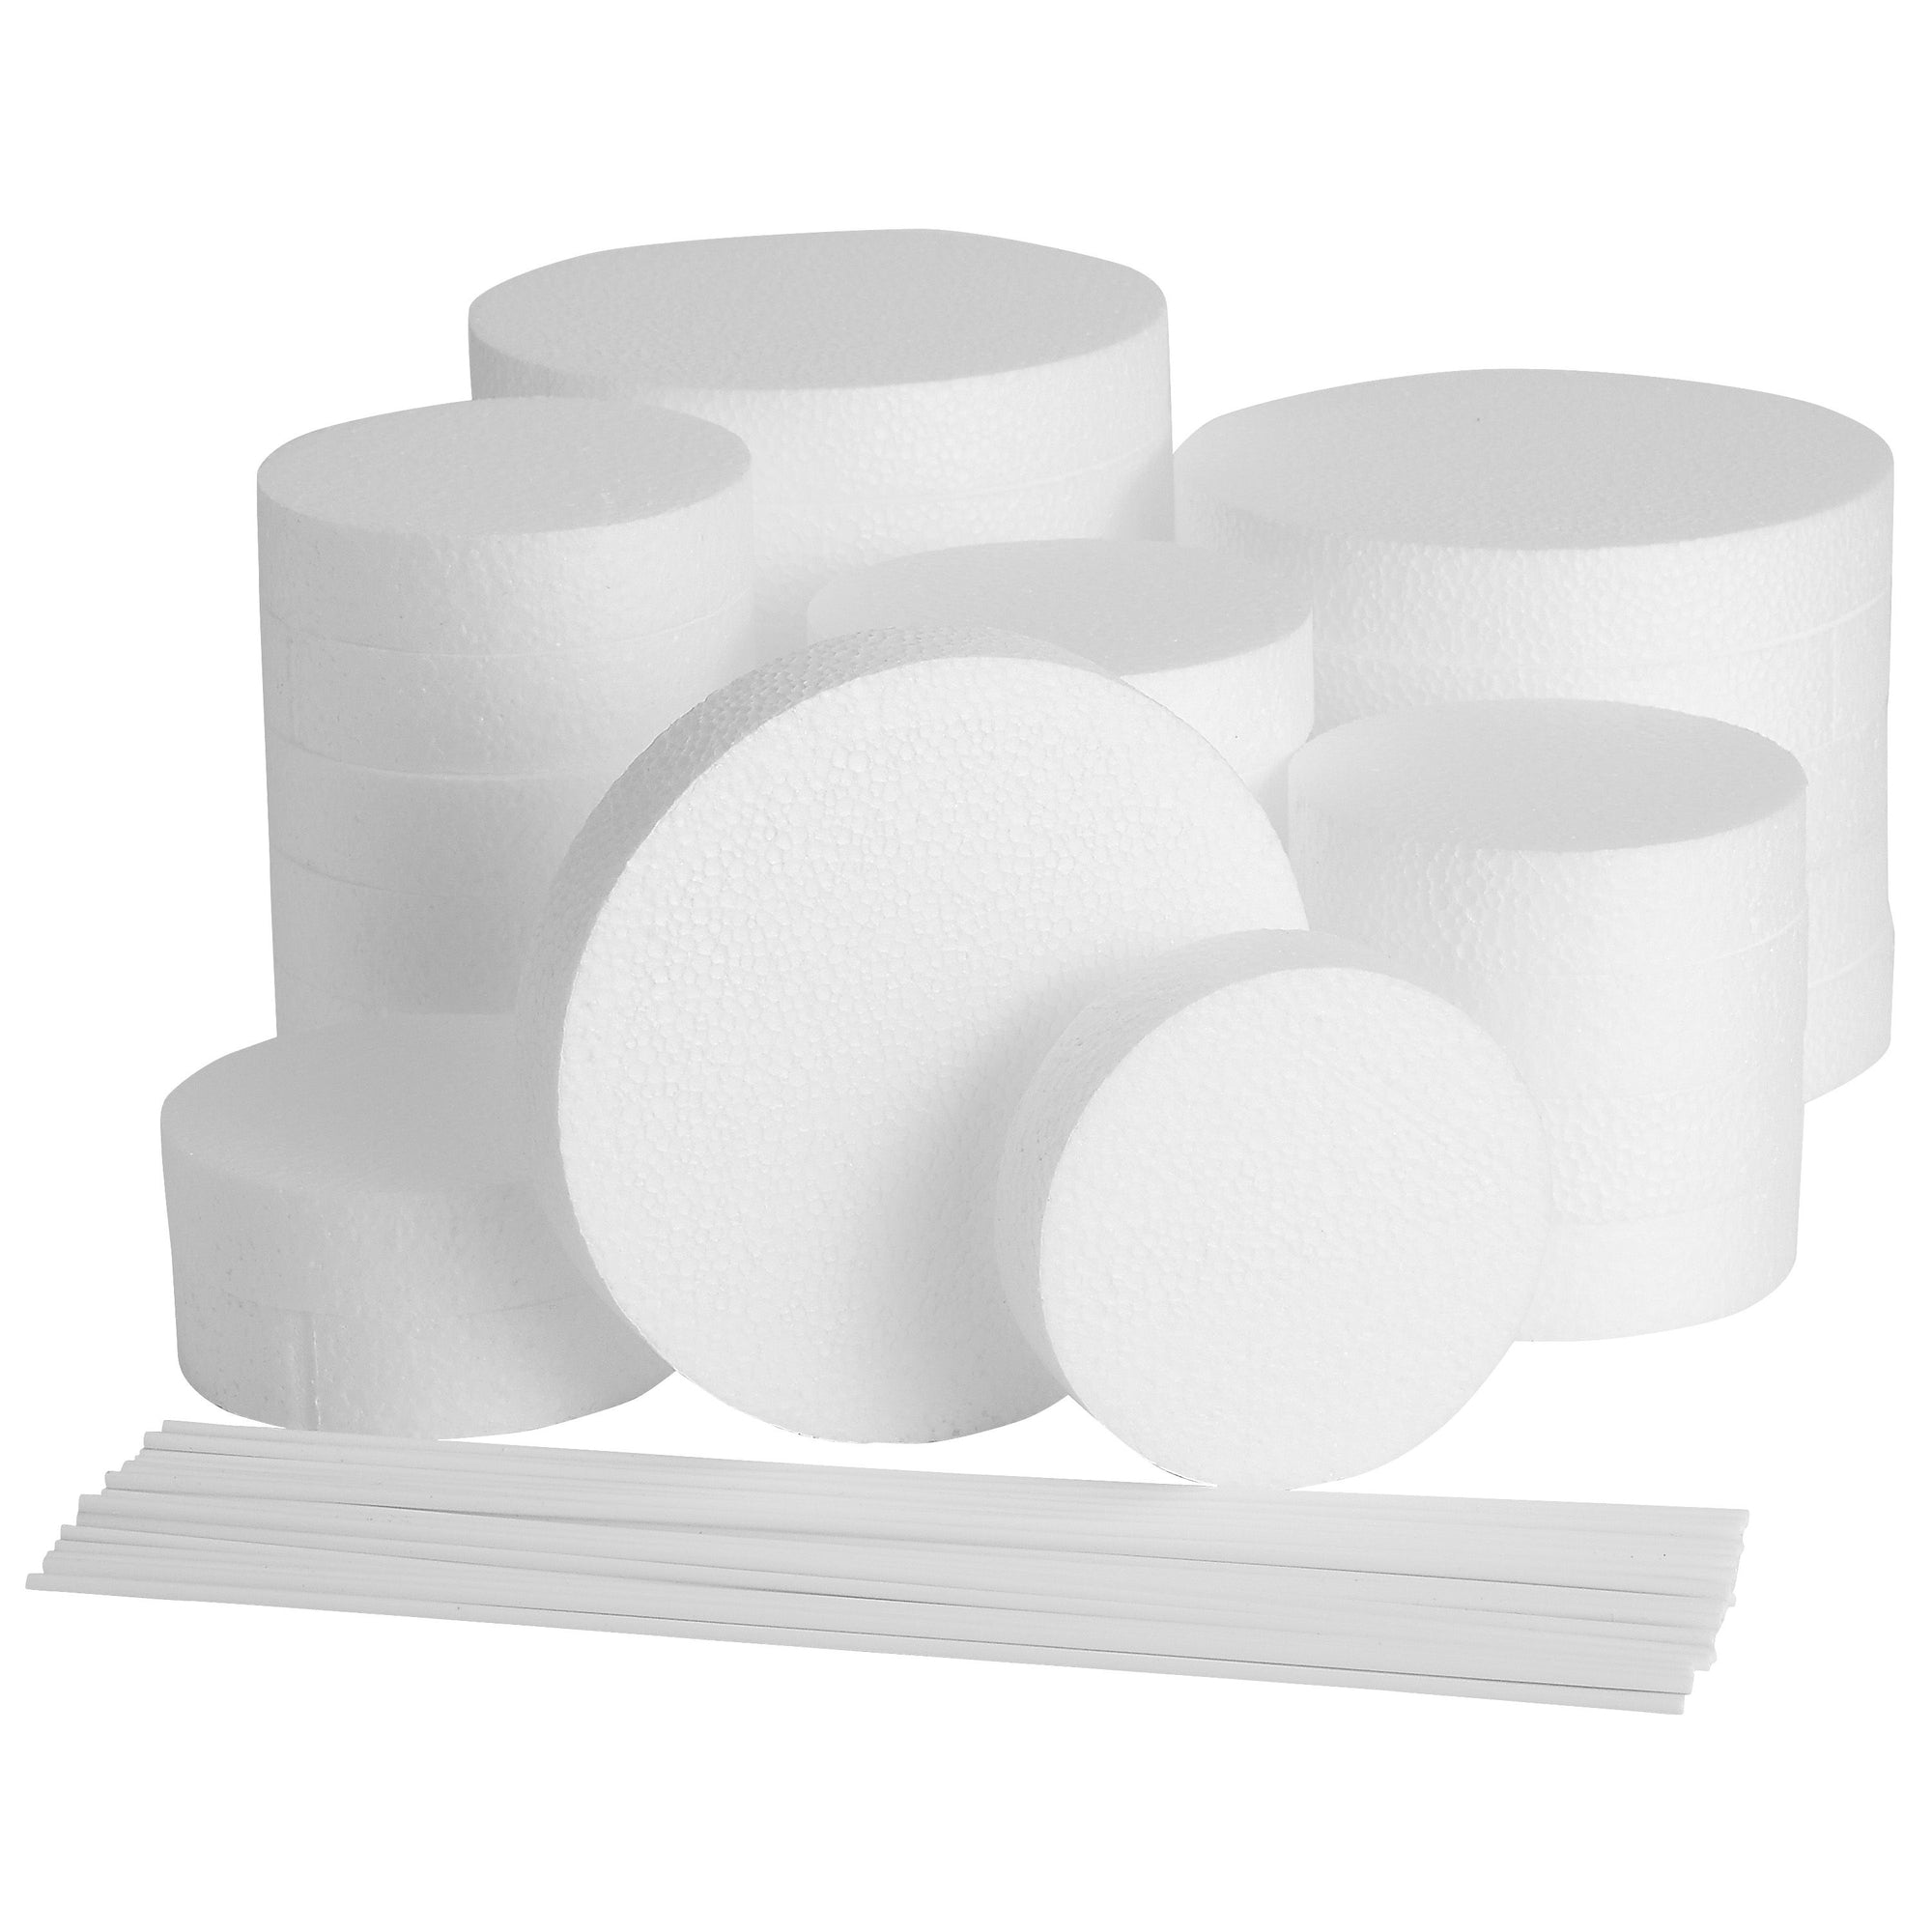  White Foam Shapes for Kids Crafts with 12 Square